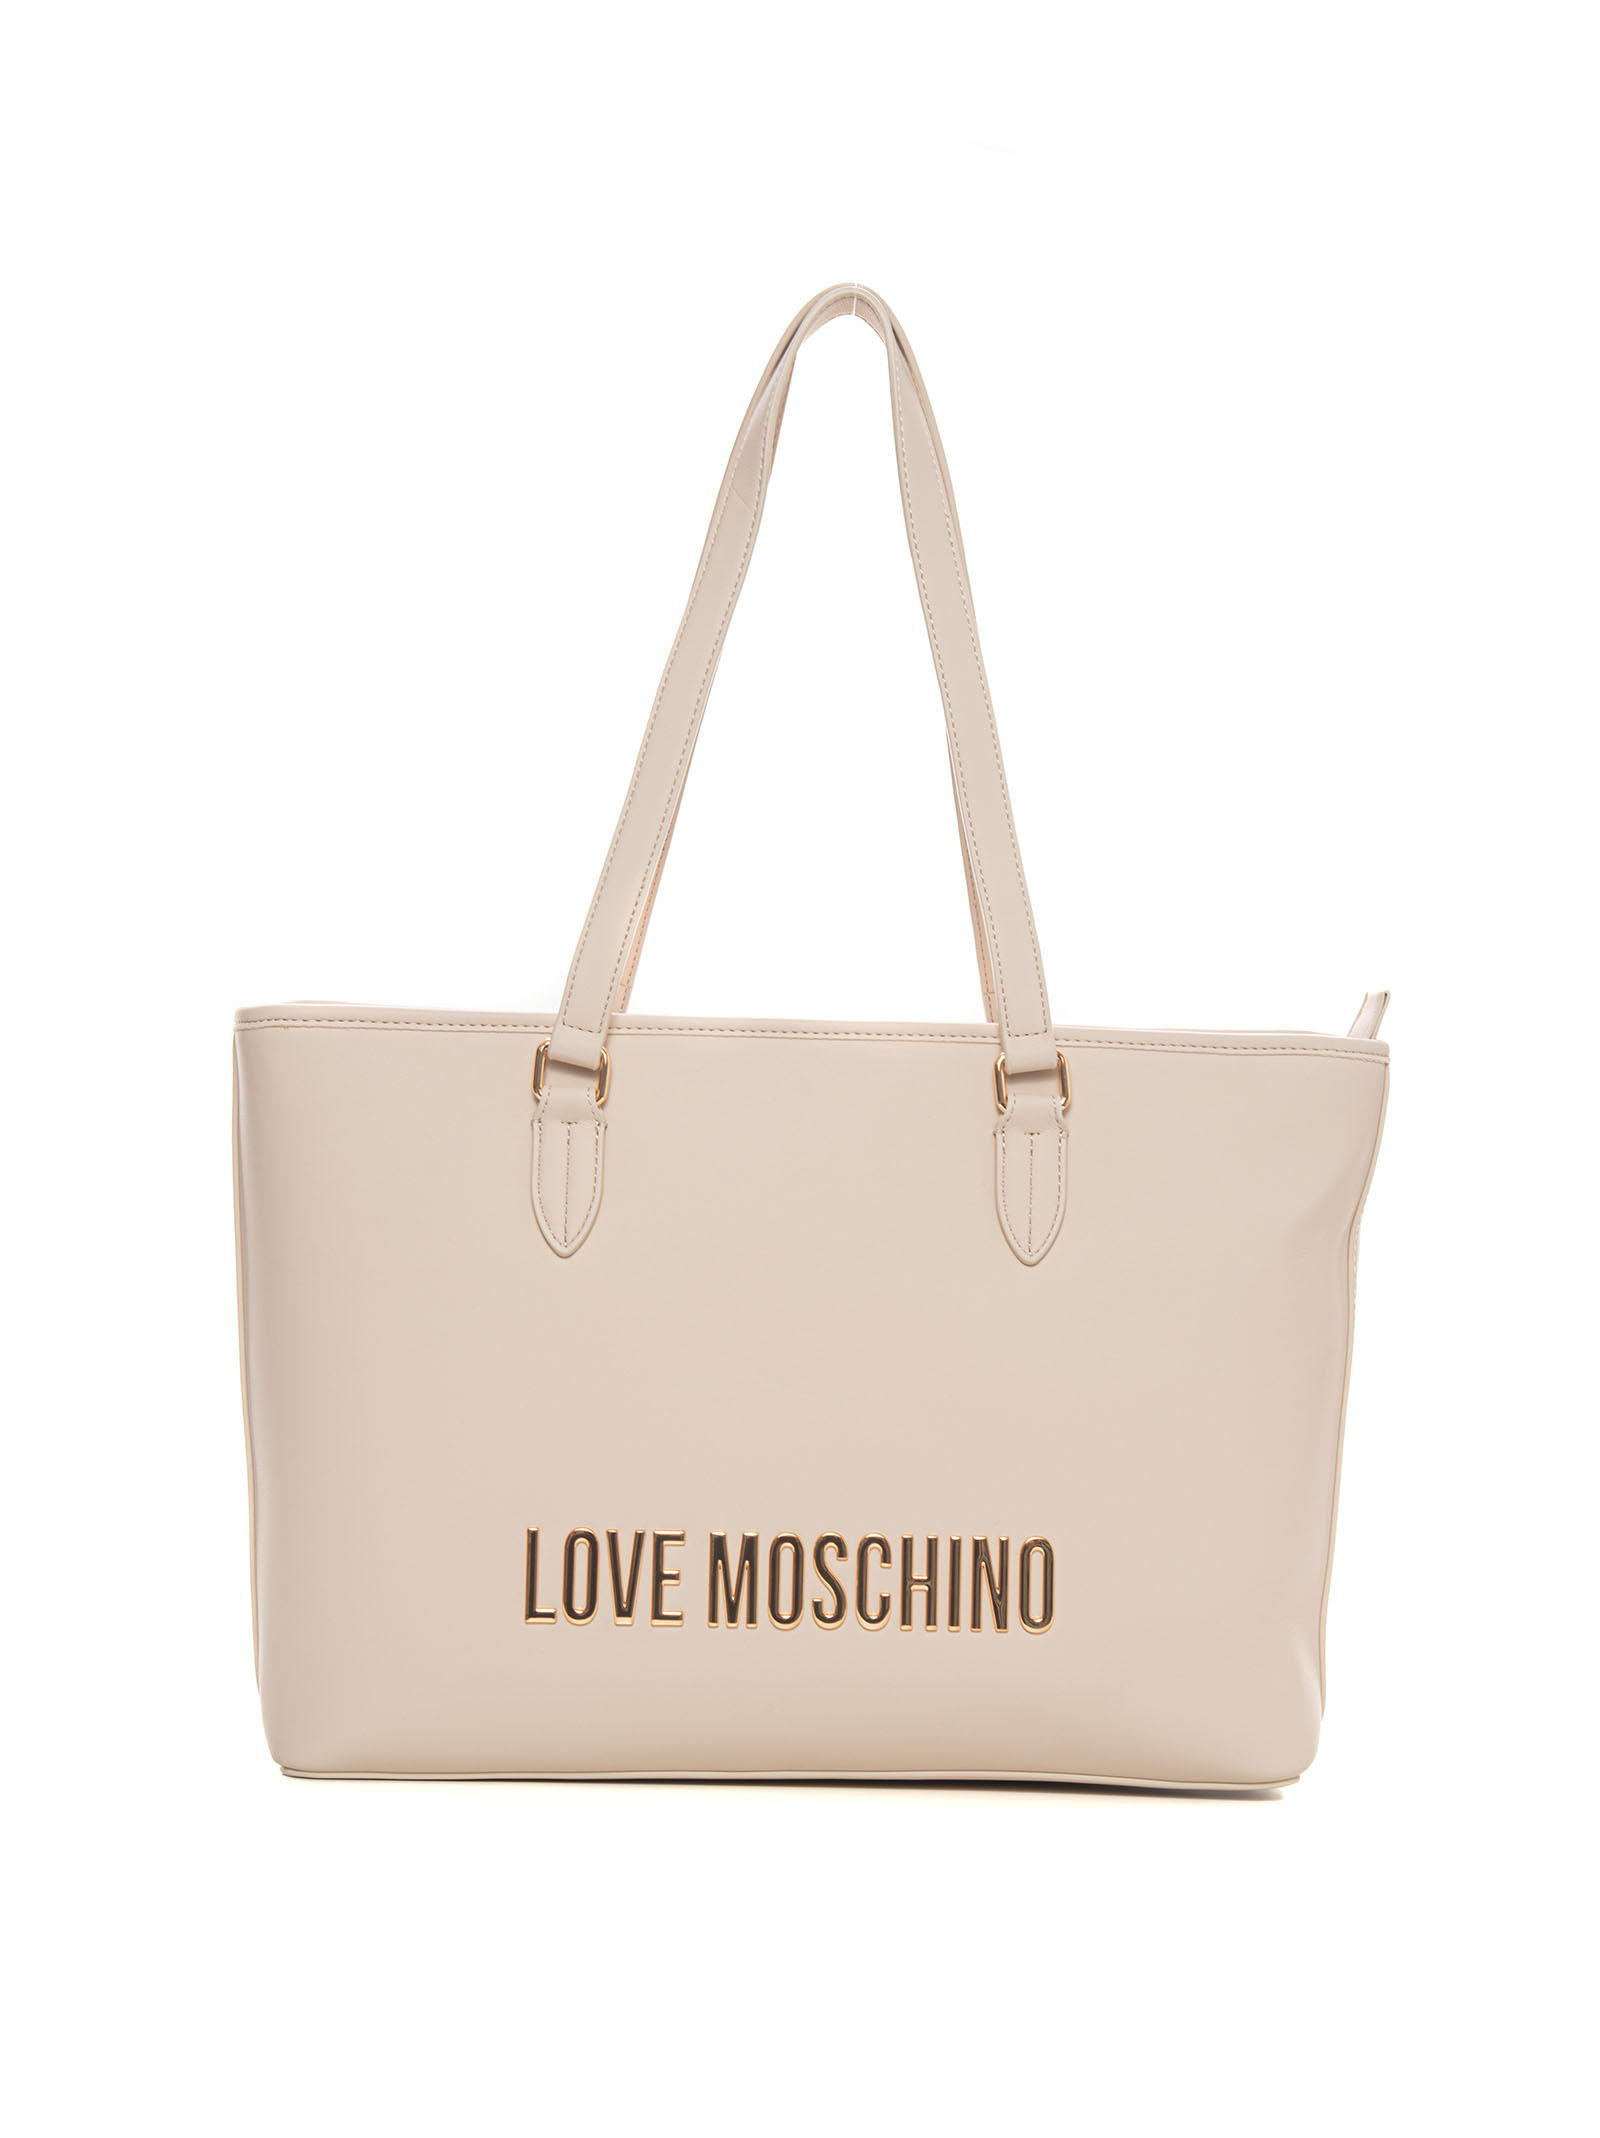 Love Moschino Women's White Ivory Faux Leather Shoulder Bag & Shoulder